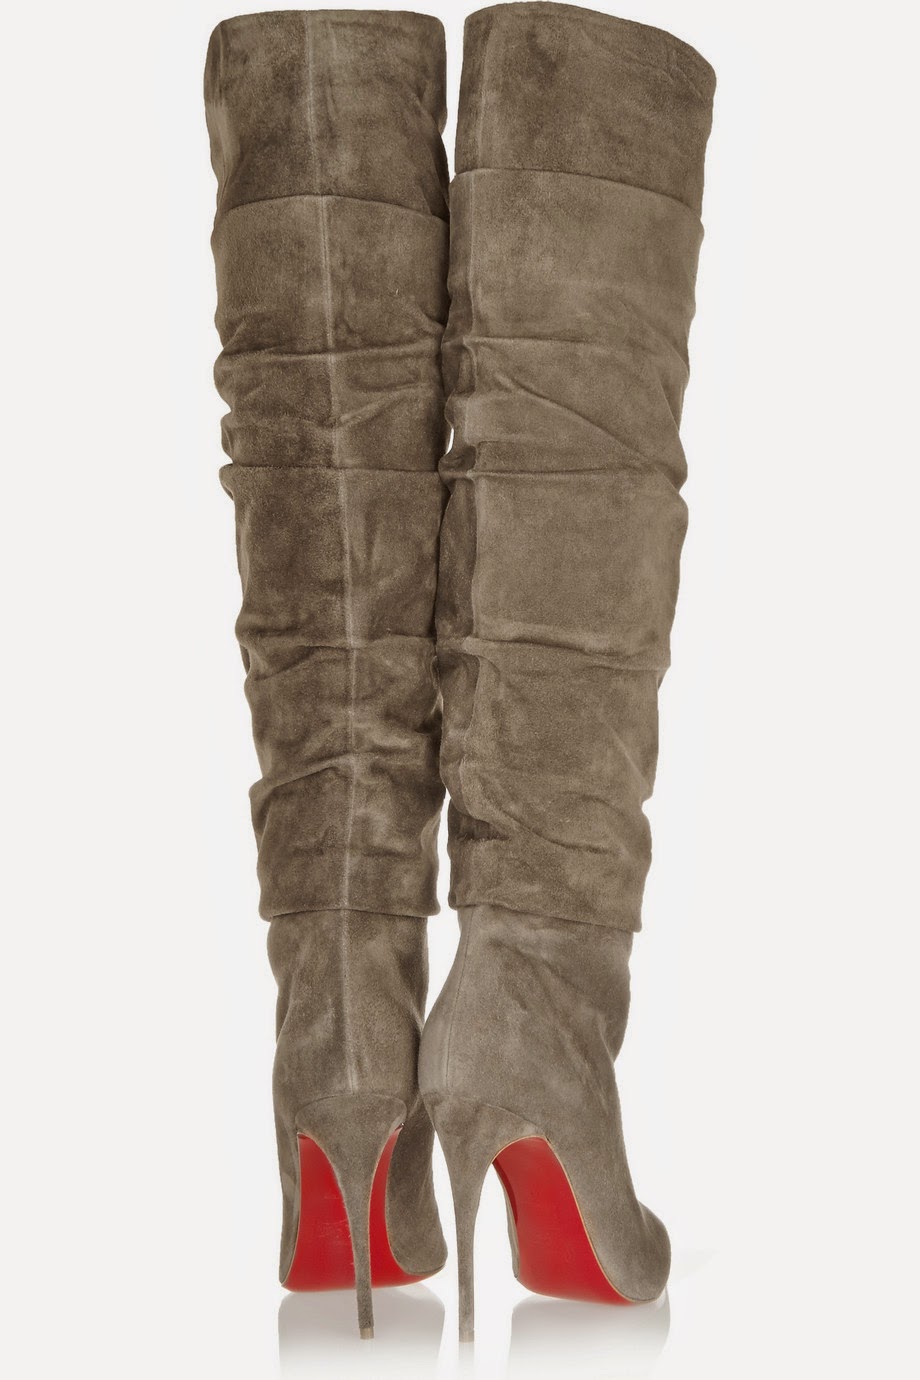 Christian Louboutin: Ishtar Botta 100 Ruched Suede Knee Boots by ...